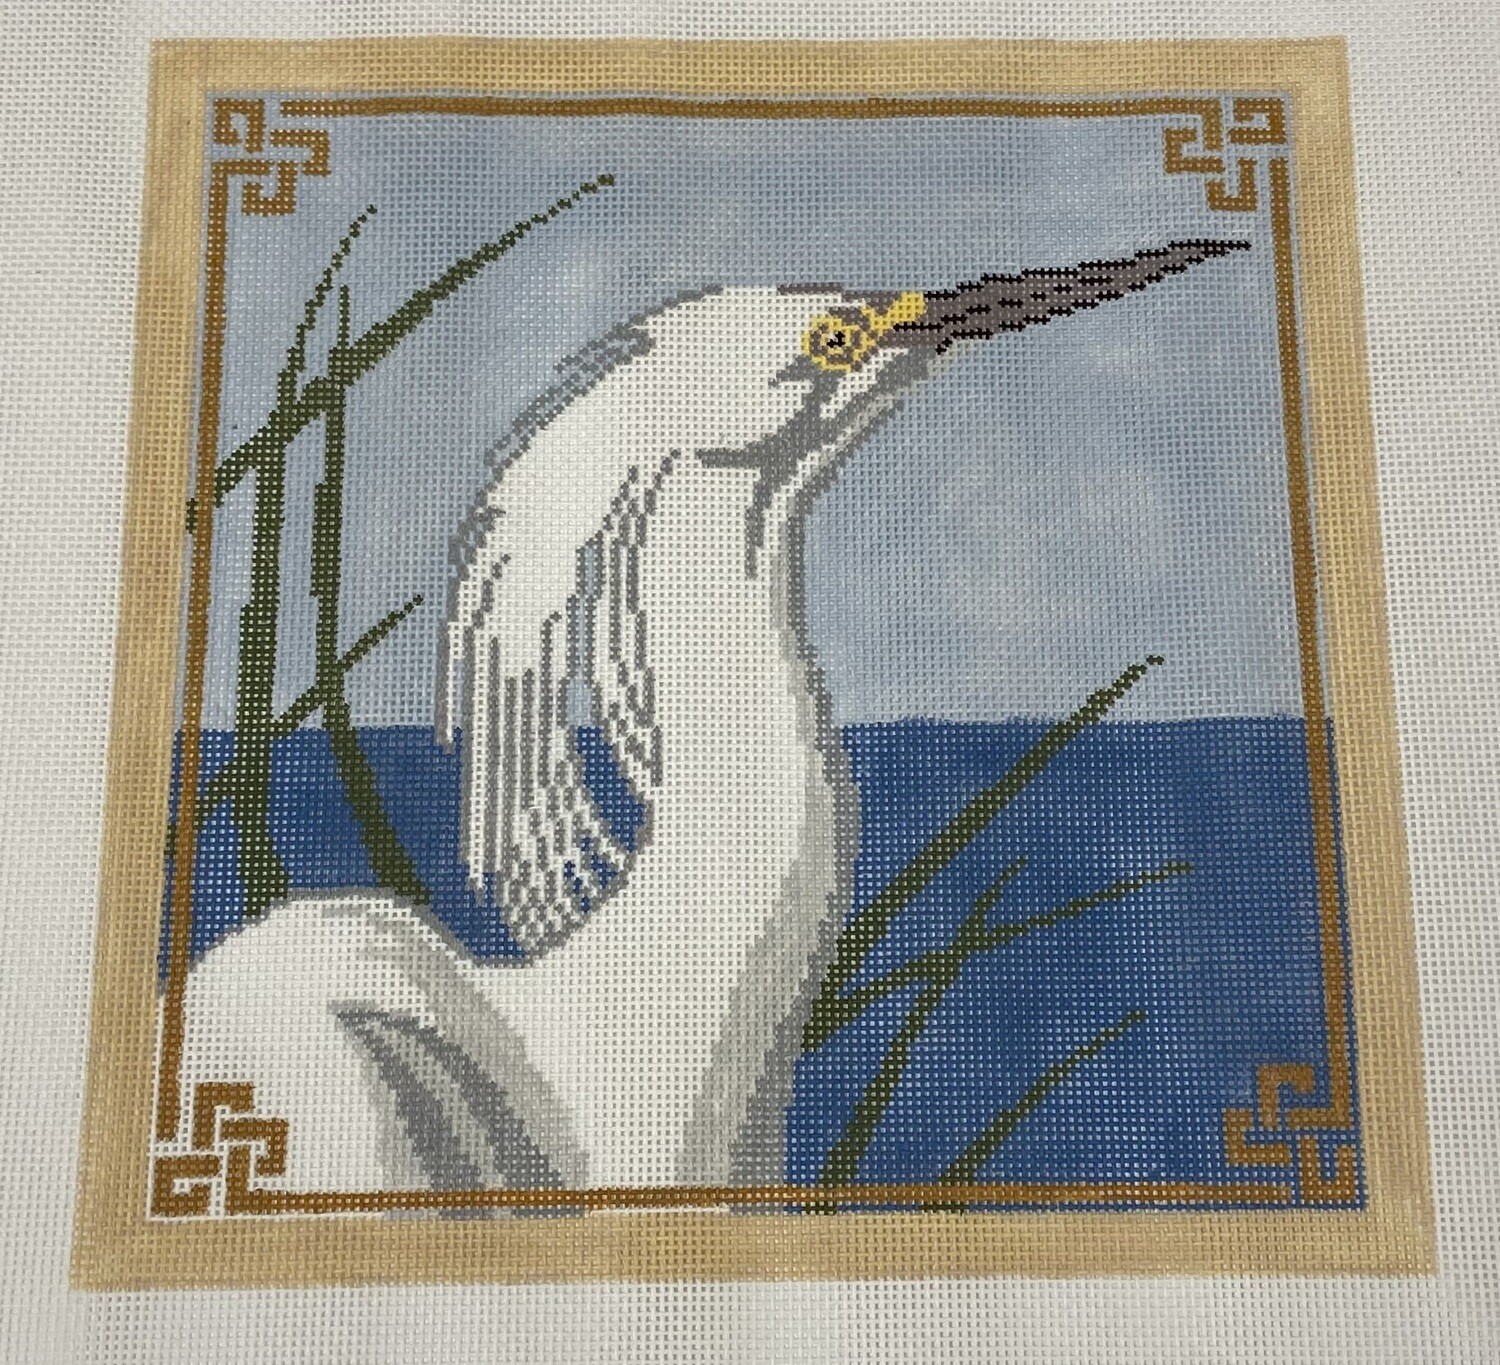 Audubon Heron   (Hand Painted by Blueberry Point)*Product may take longer than usual to arrive*